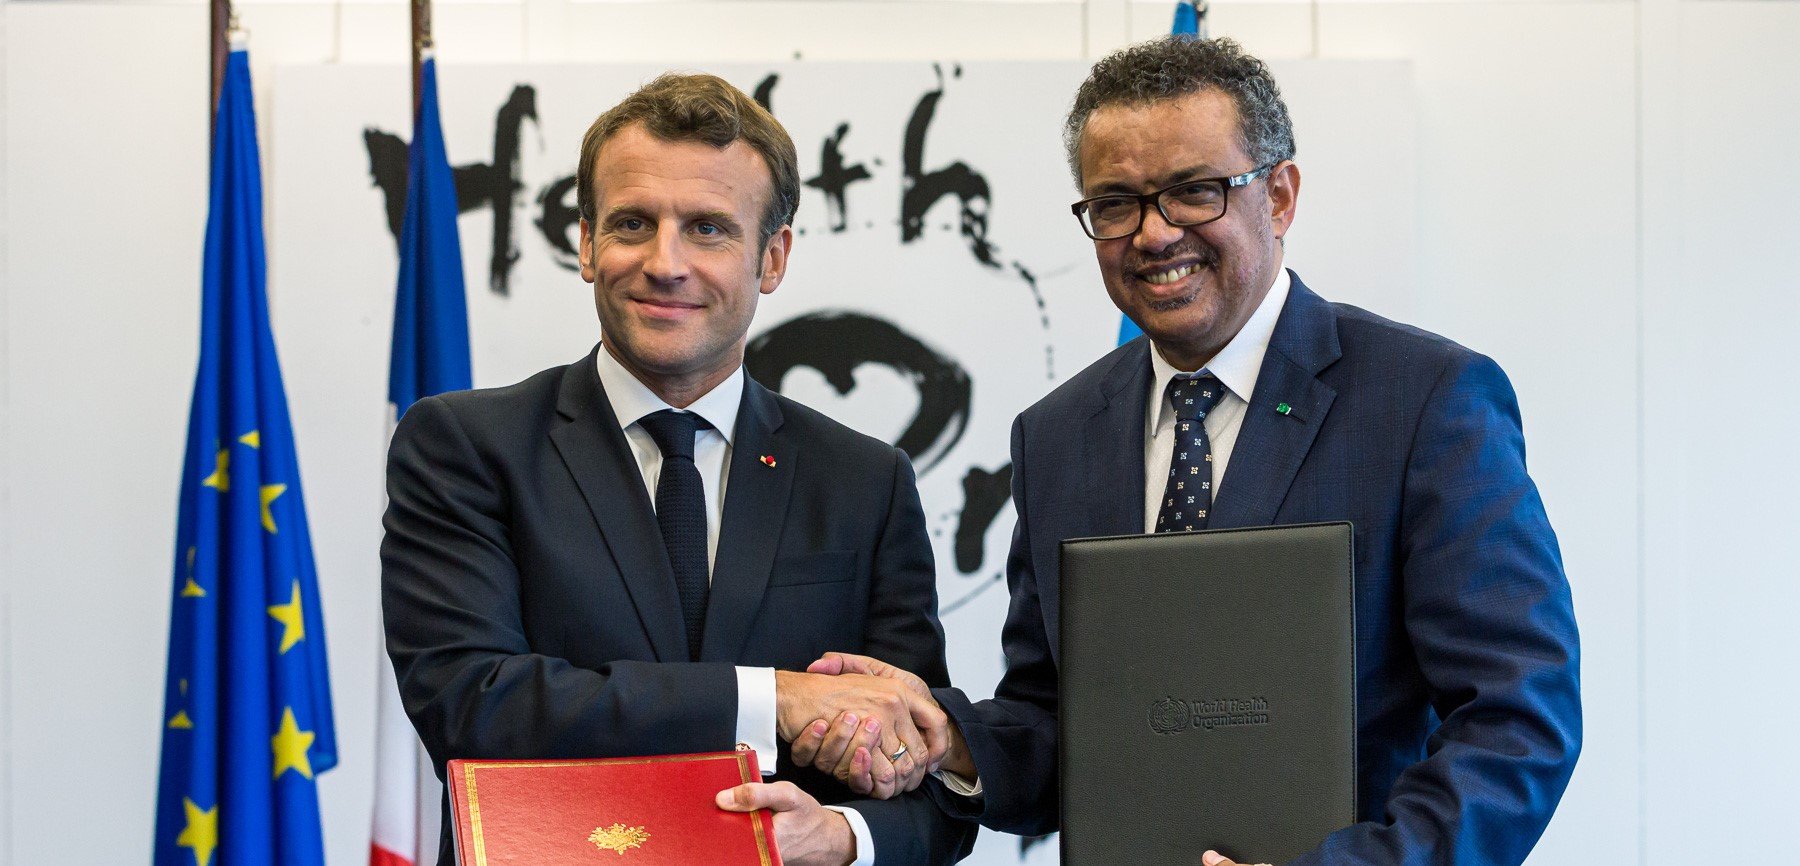 Emmanuel Macron, President of the French Republic and Dr Tedros Adhanom Ghebreyesus, WHO Director-General